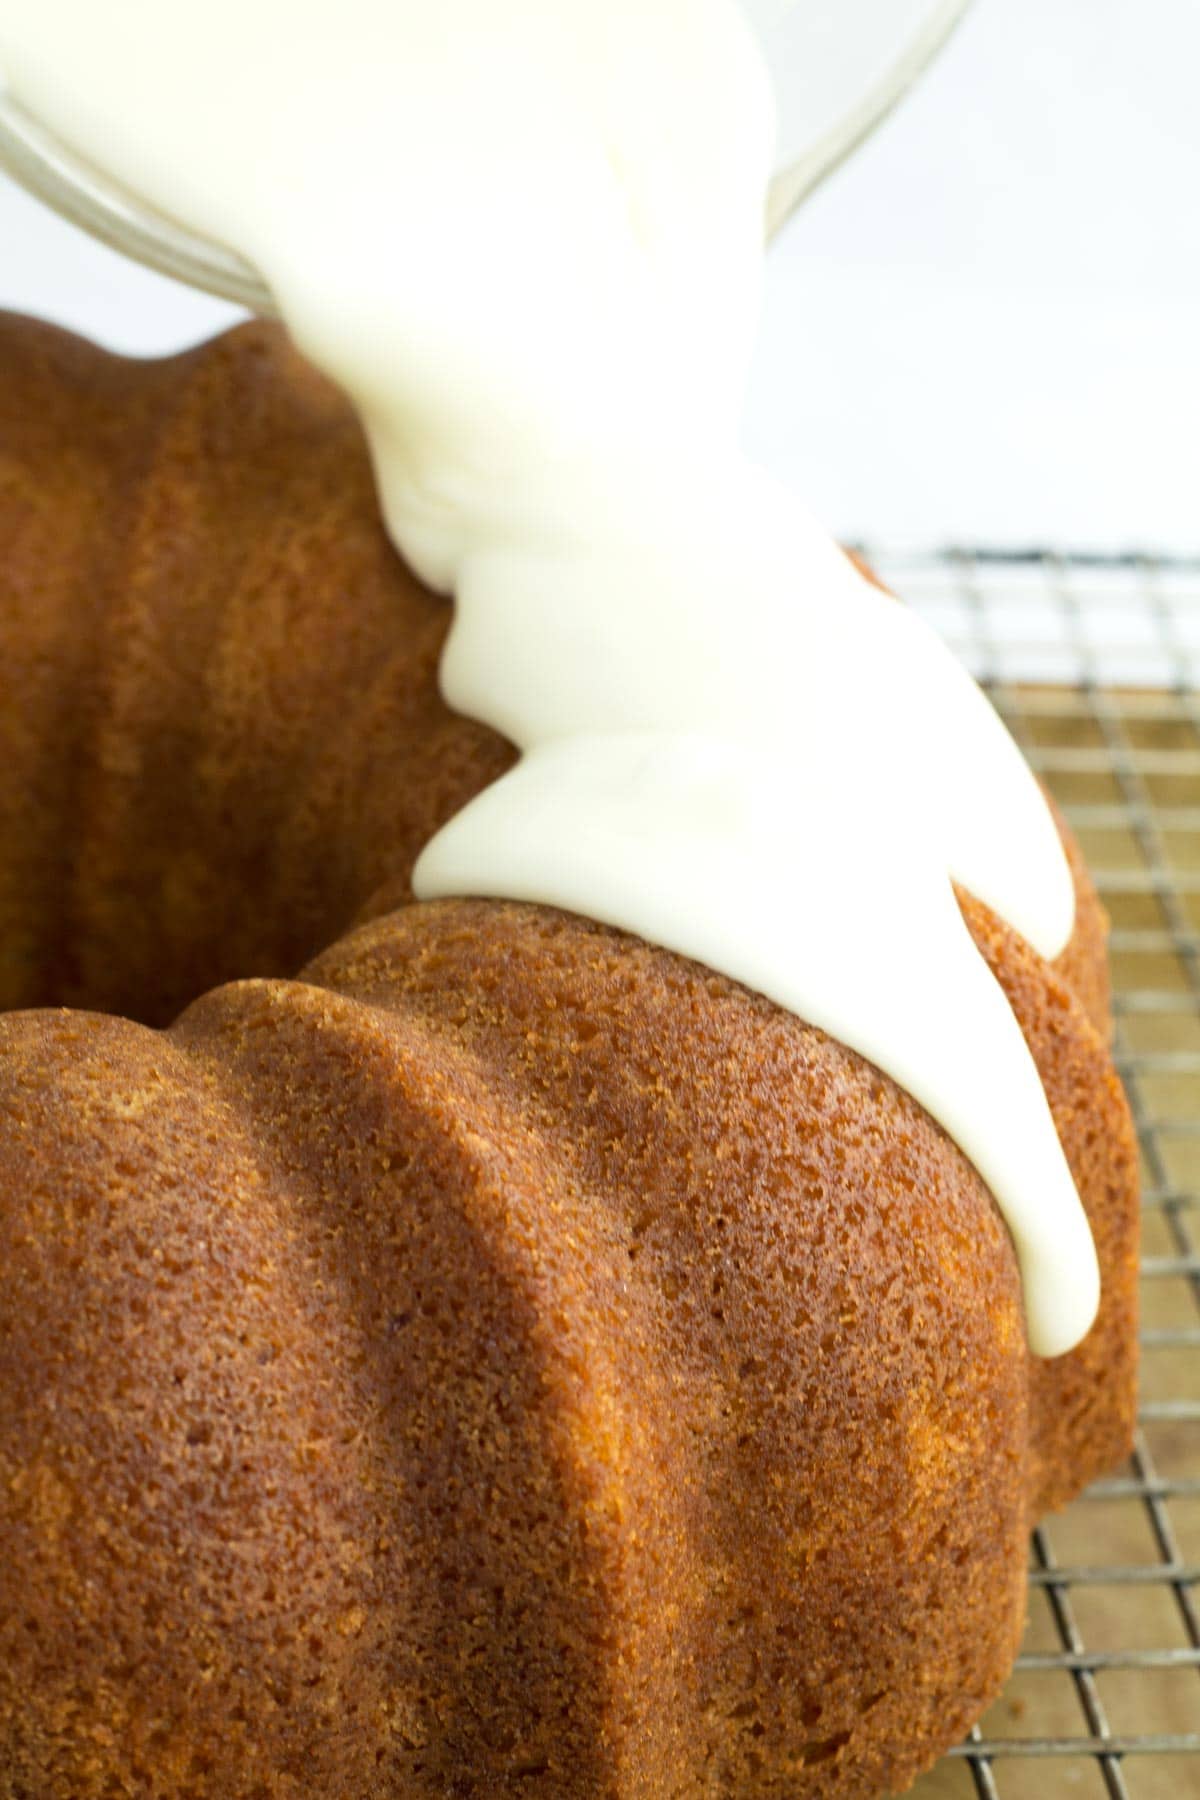 Pouring white chocolate frosting over the Bundt cake.